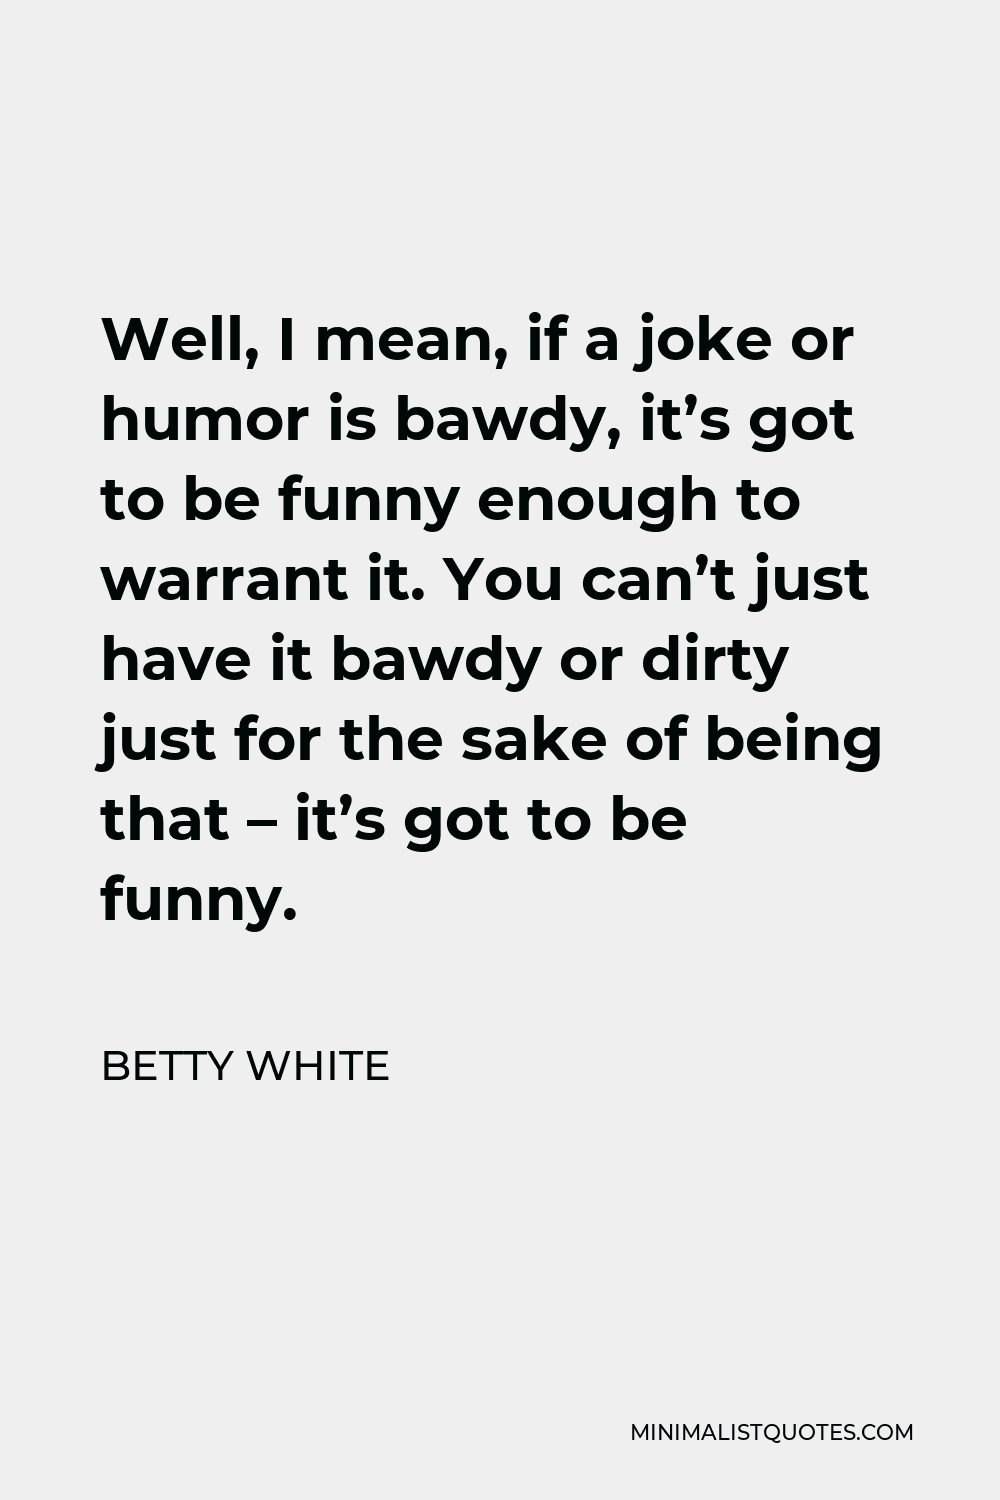 Betty White Quote - Well, I mean, if a joke or humor is bawdy, it’s got to be funny enough to warrant it. You can’t just have it bawdy or dirty just for the sake of being that – it’s got to be funny.